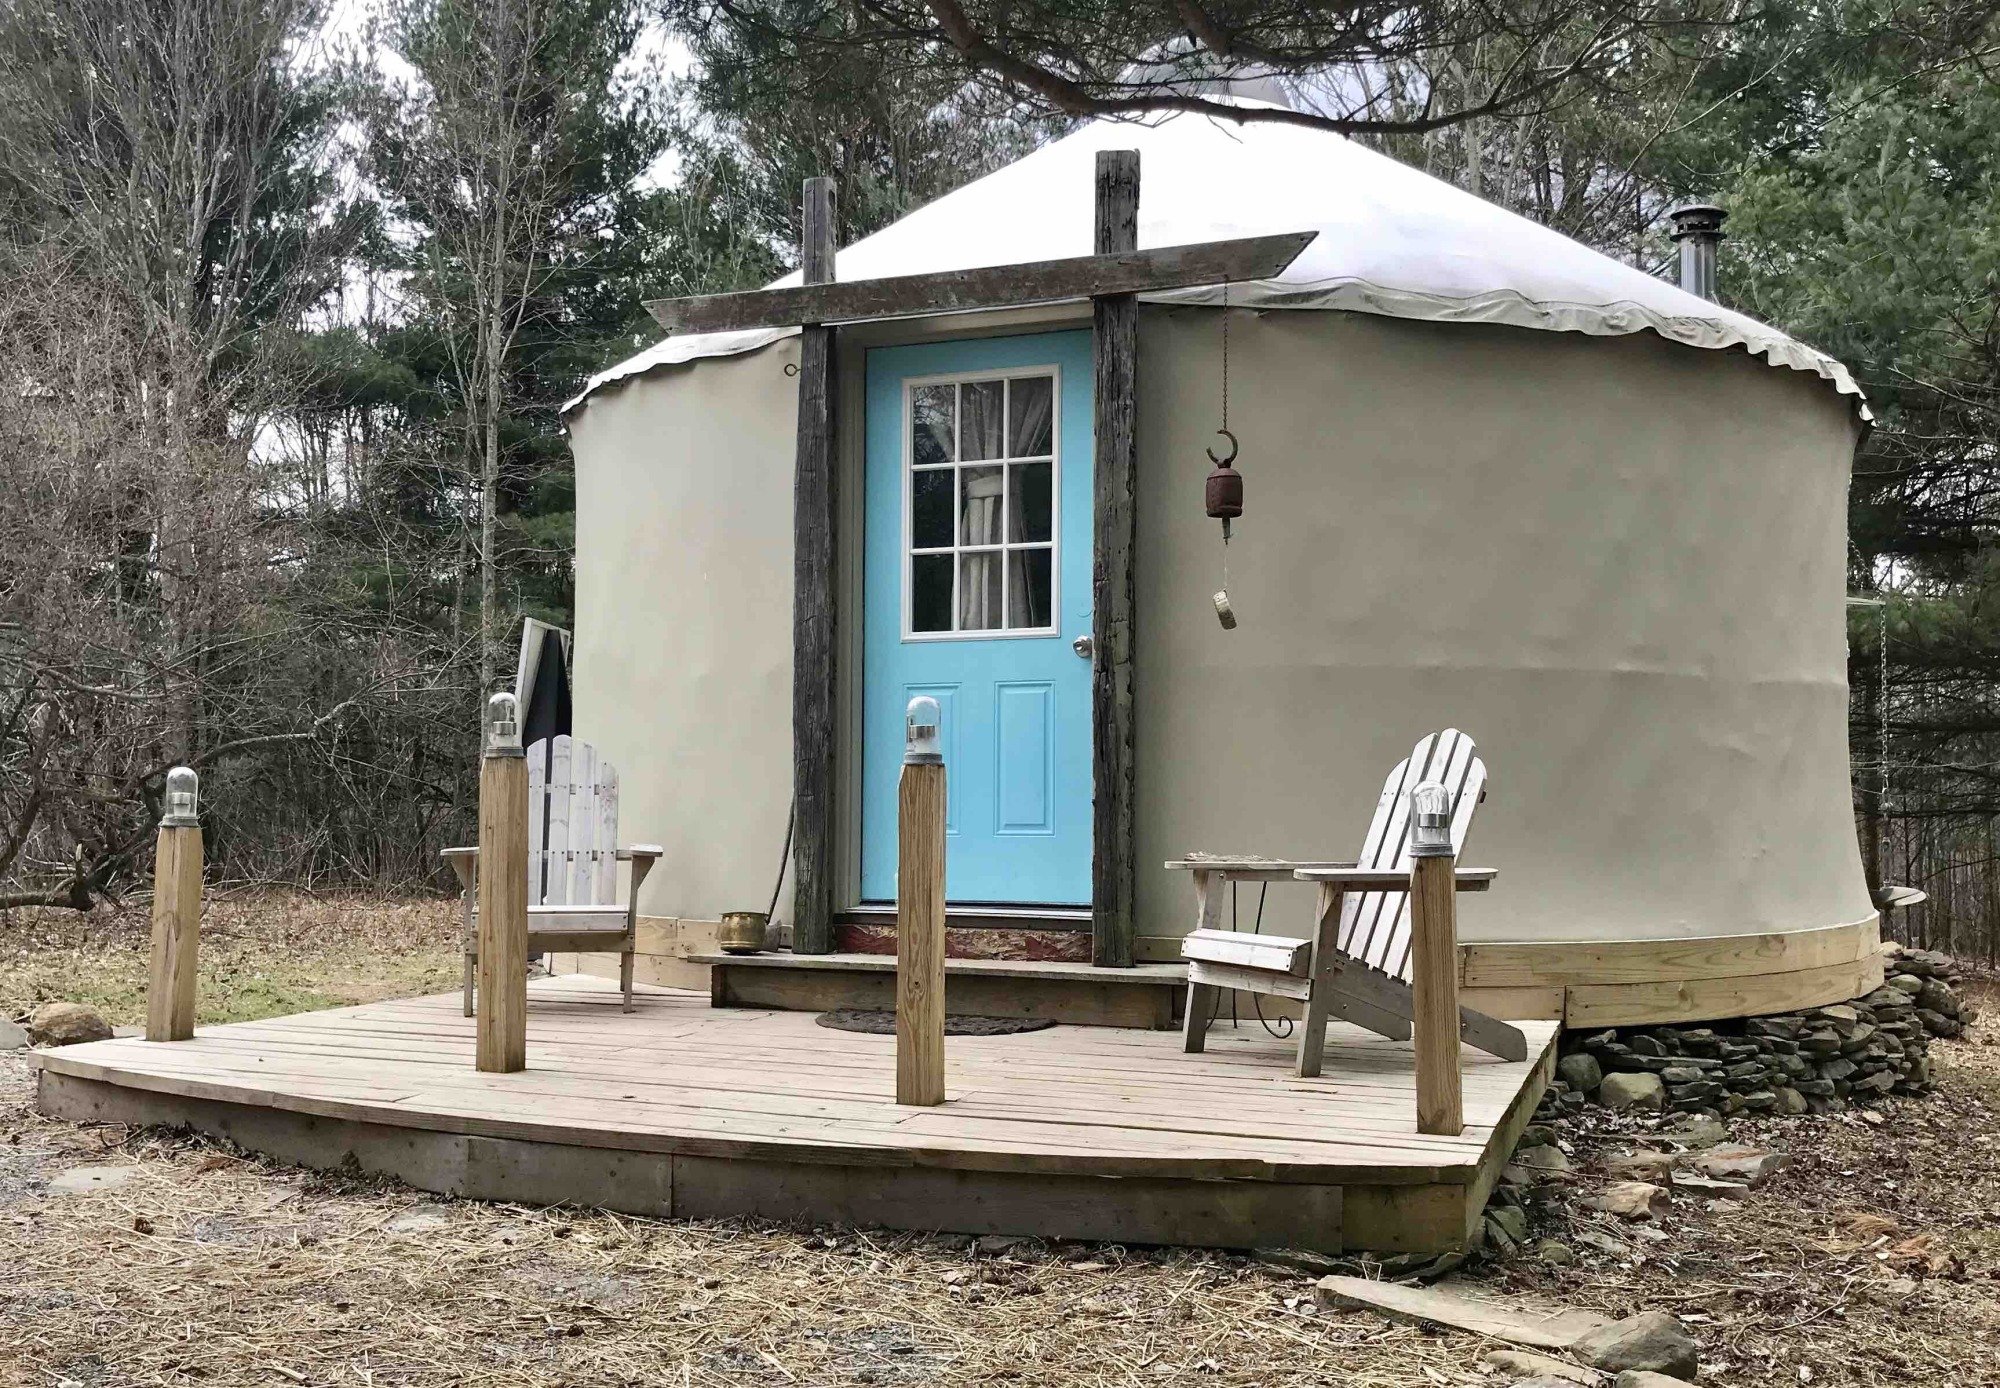 Airbnb listing of a yurt